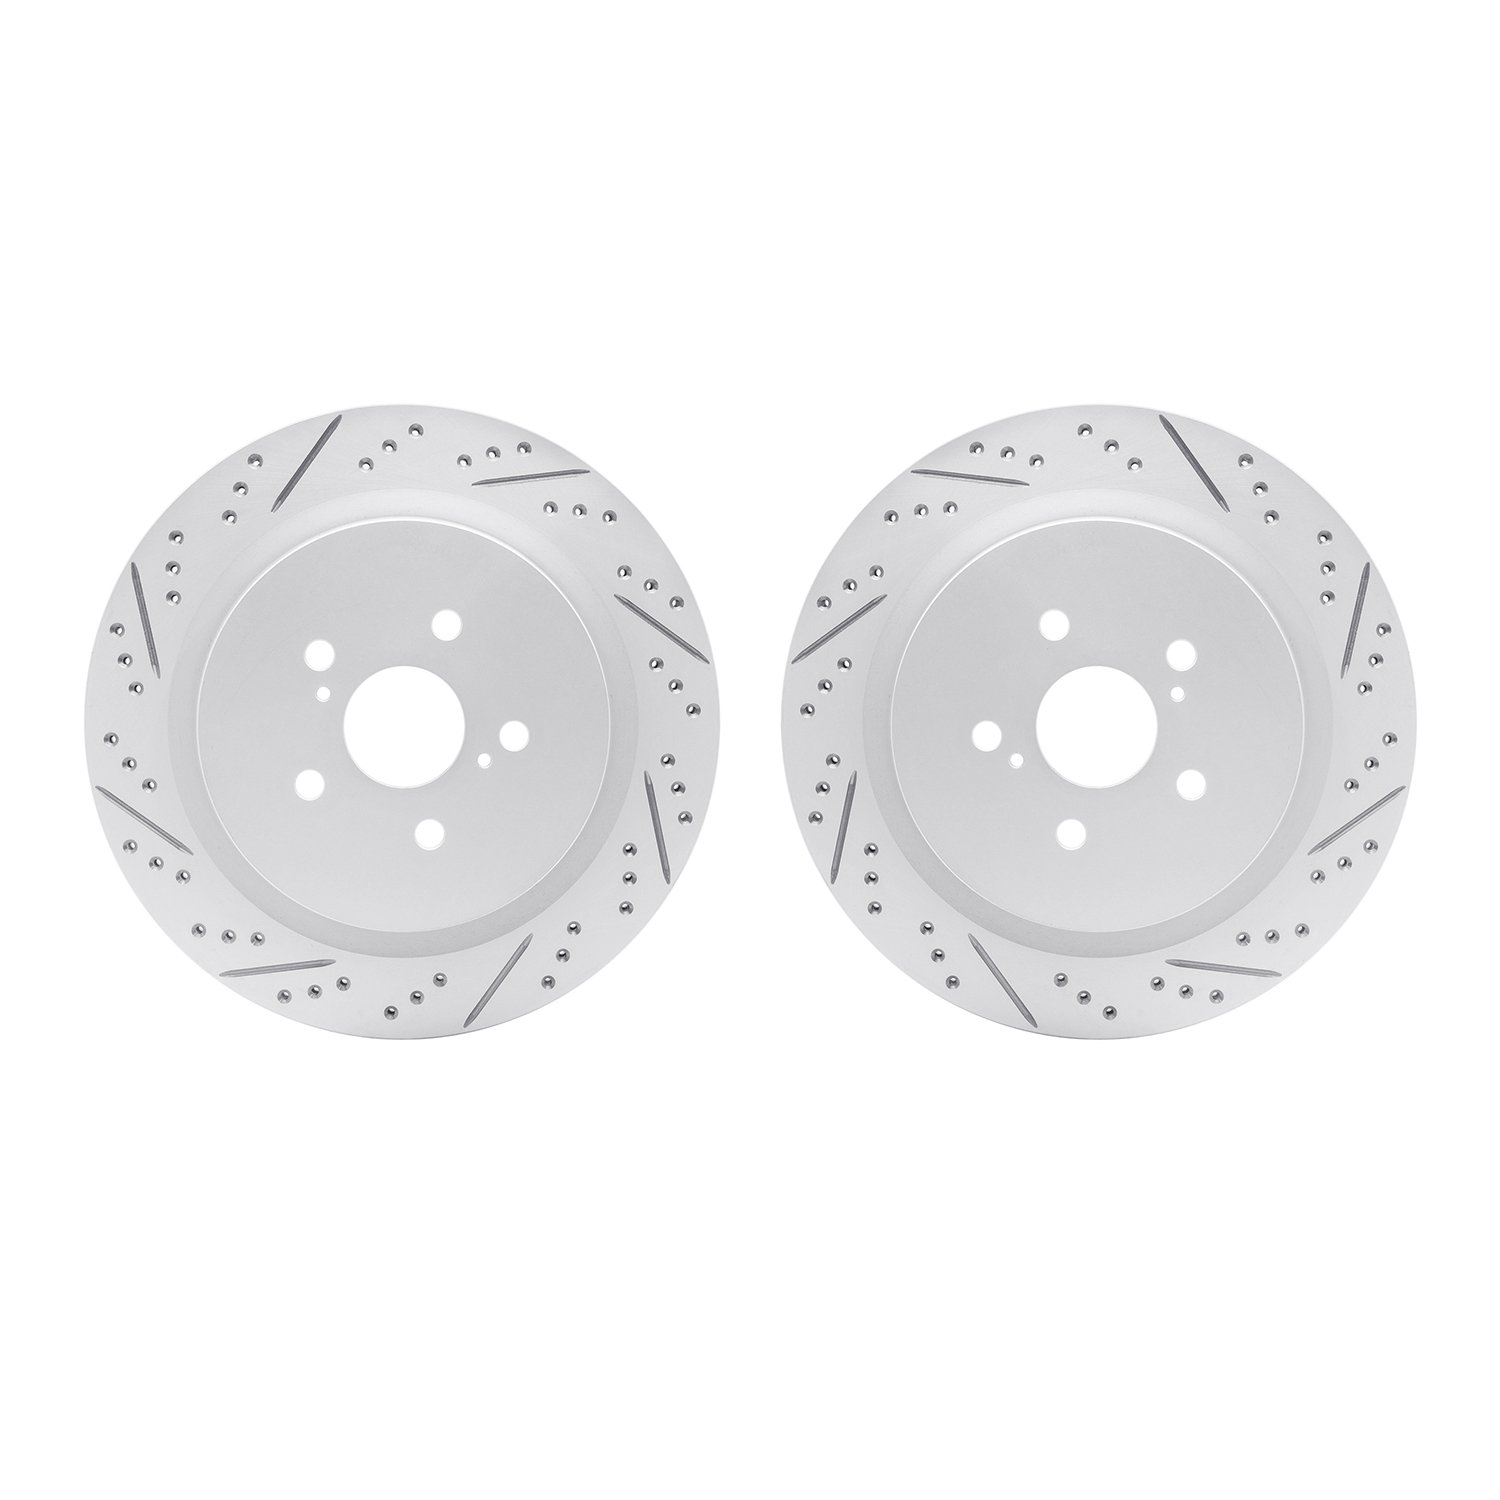 2002-75027 Geoperformance Drilled/Slotted Brake Rotors, Fits Select Lexus/Toyota/Scion, Position: Rear